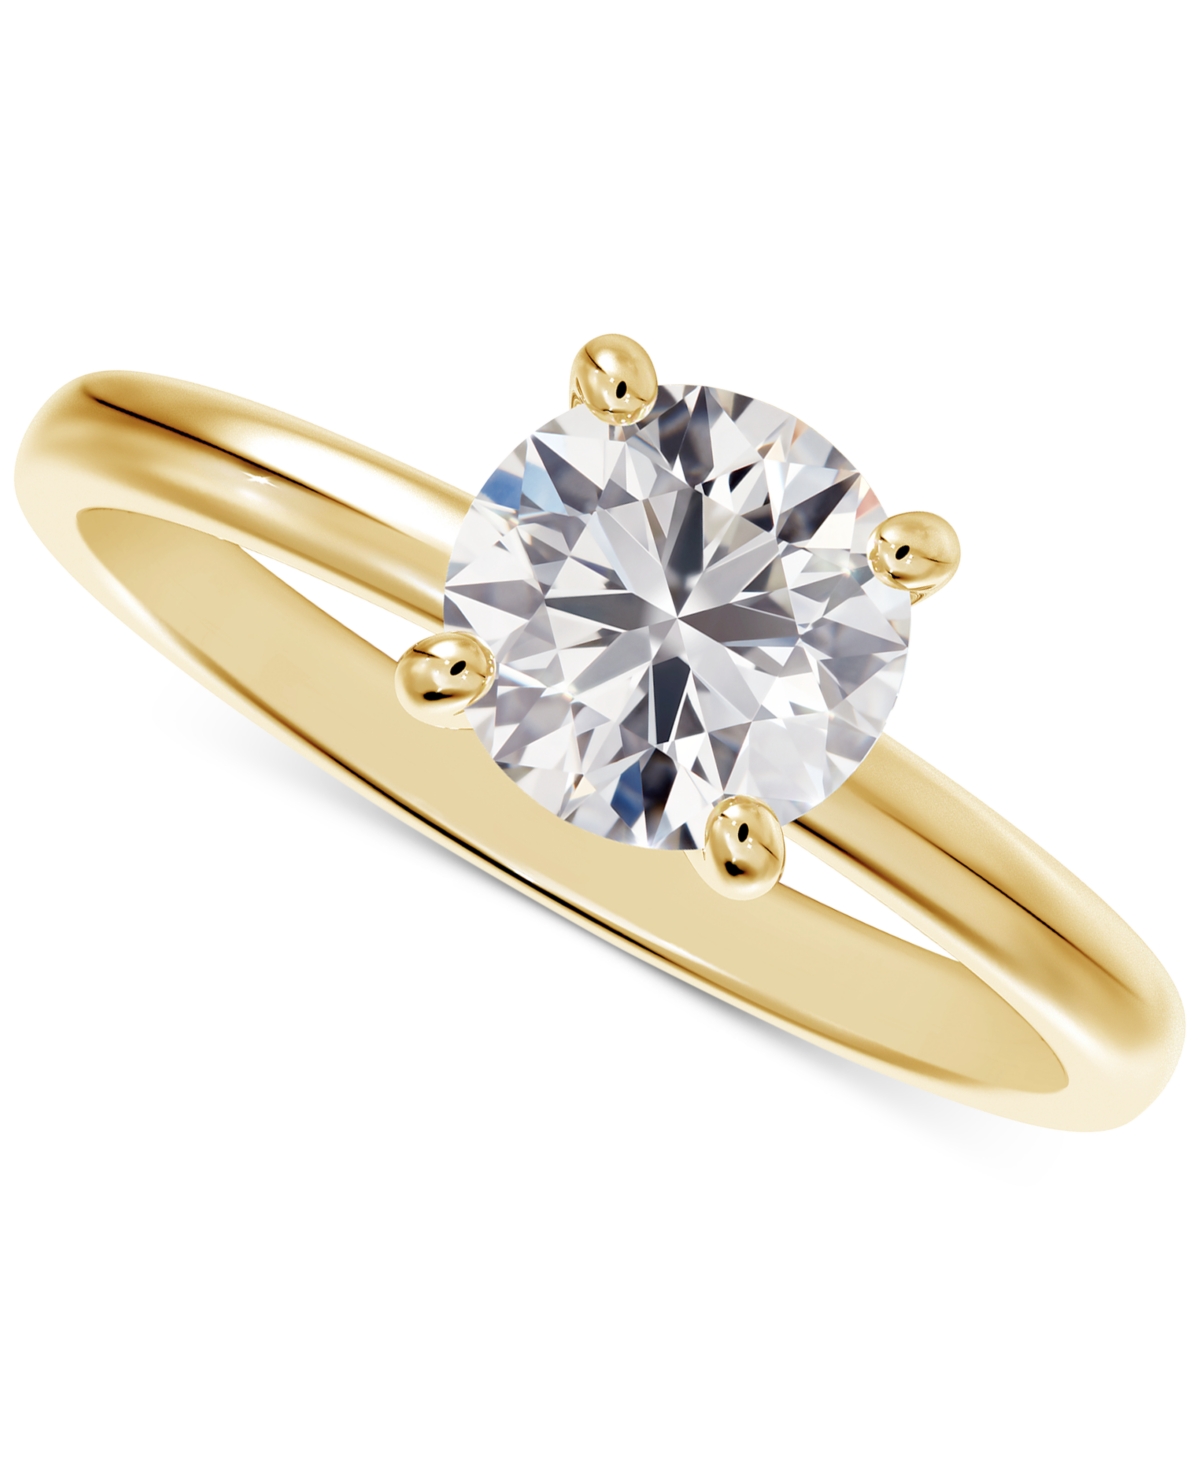 De Beers Forevermark Portfolio by De Beers Forevermark Diamond Round-Cut Solitaire Engagement Ring (5/8 ct. t.w.)